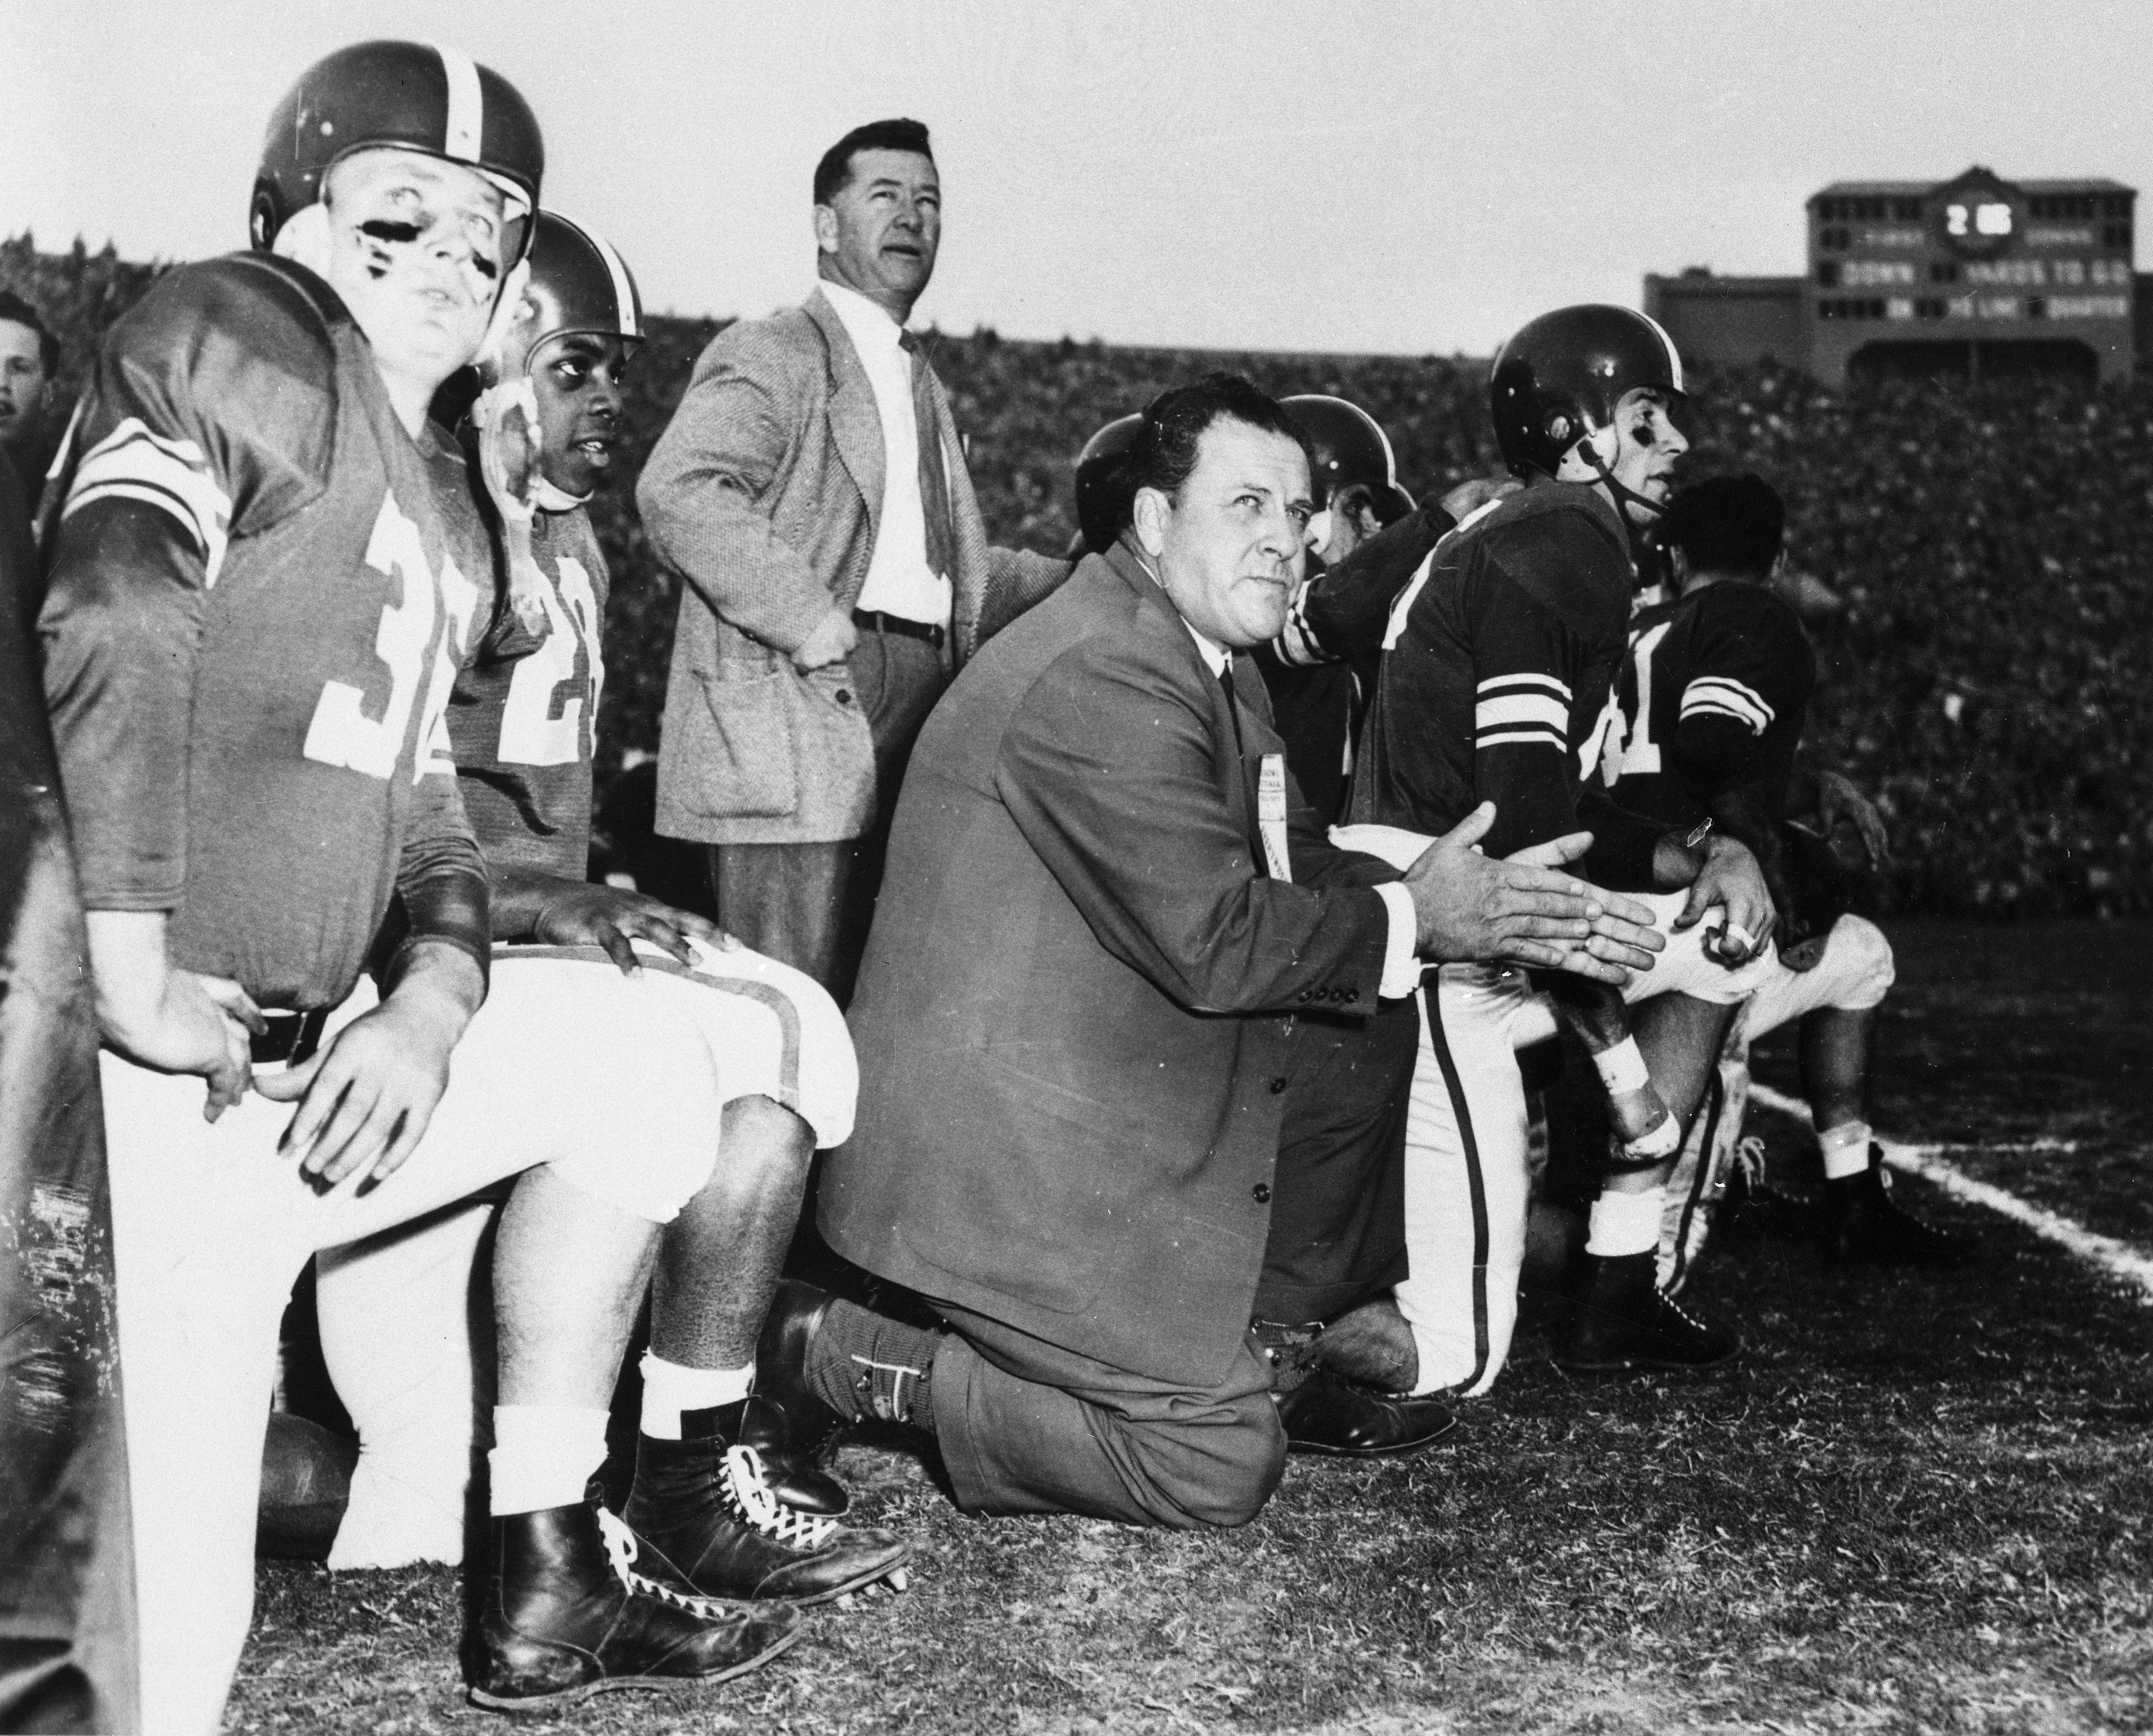 Coaches & Players on sidelines at 1954 Rose Bowl